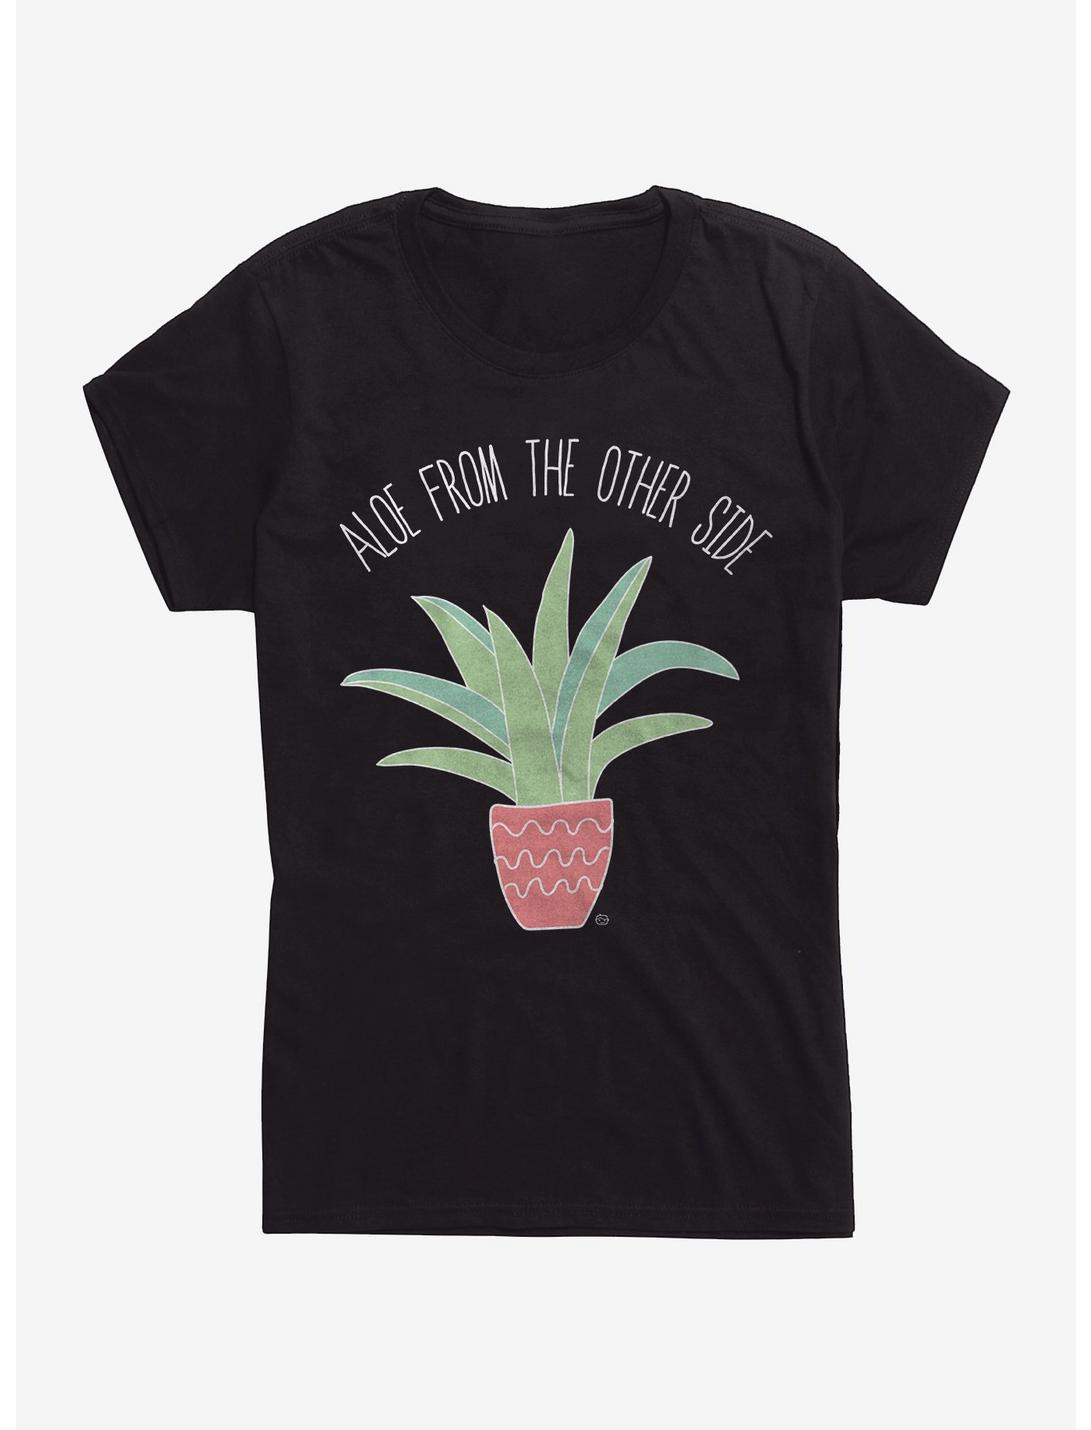 Aloe From The Other Side Womens T-Shirt, BLACK, hi-res